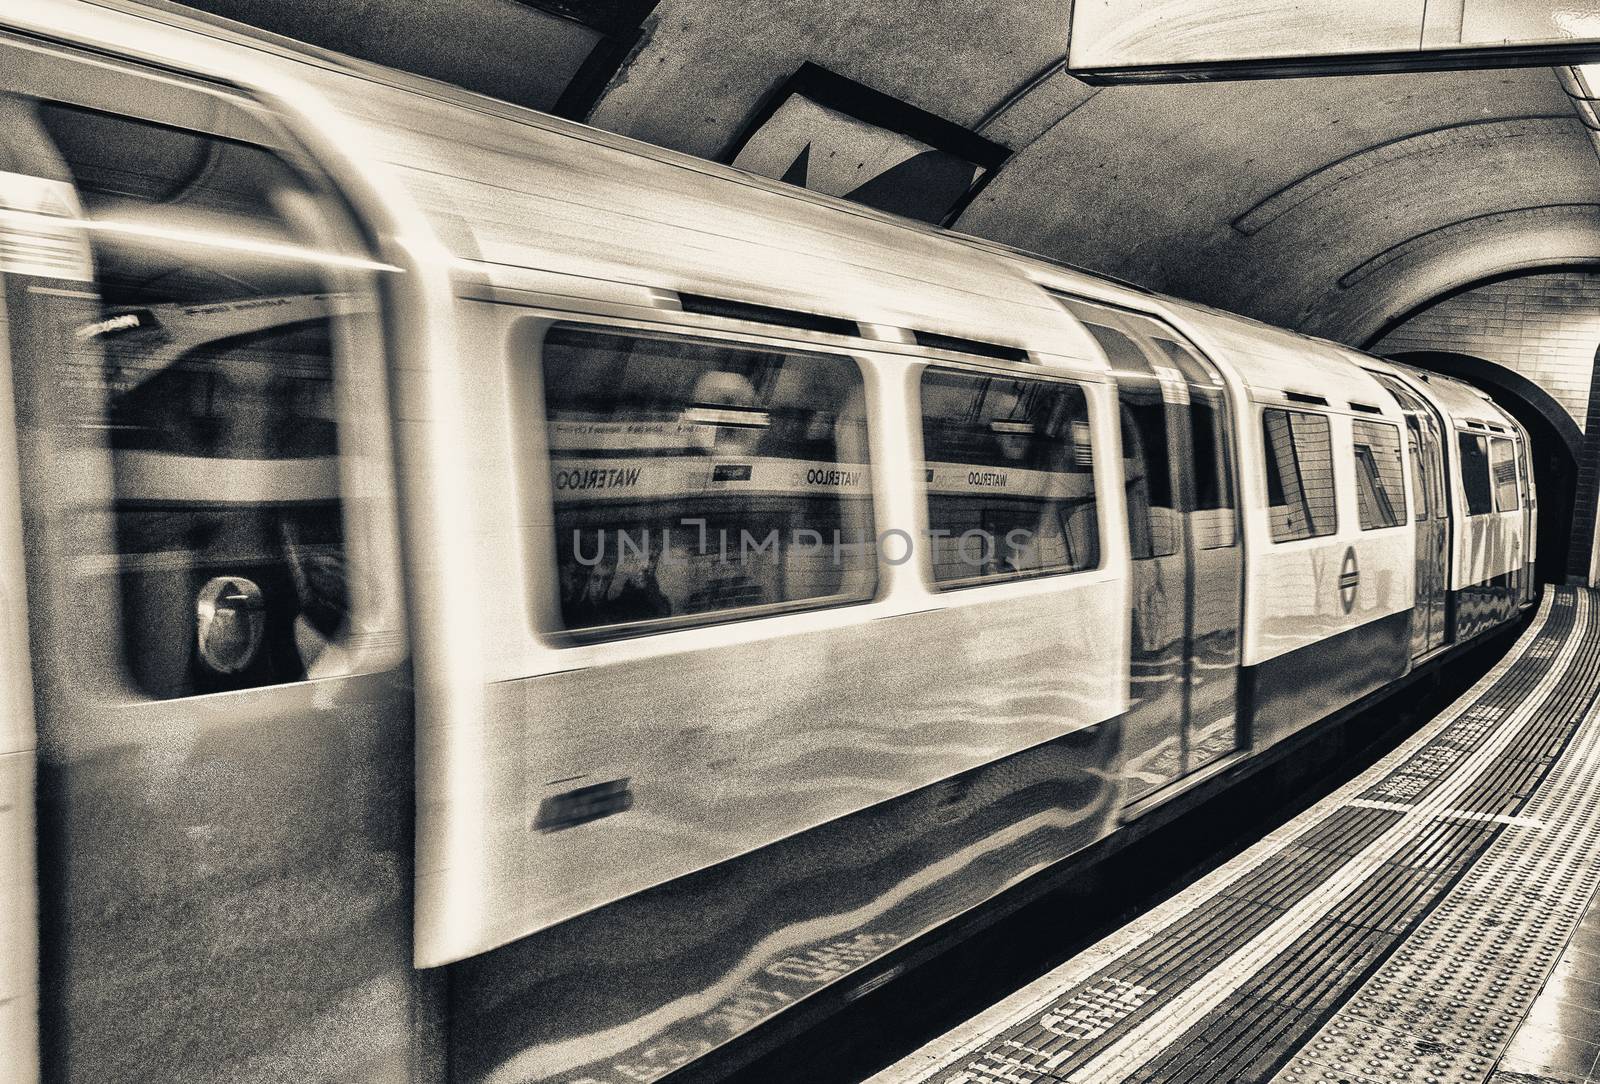 A subway train in motion arriving at a London underground train station